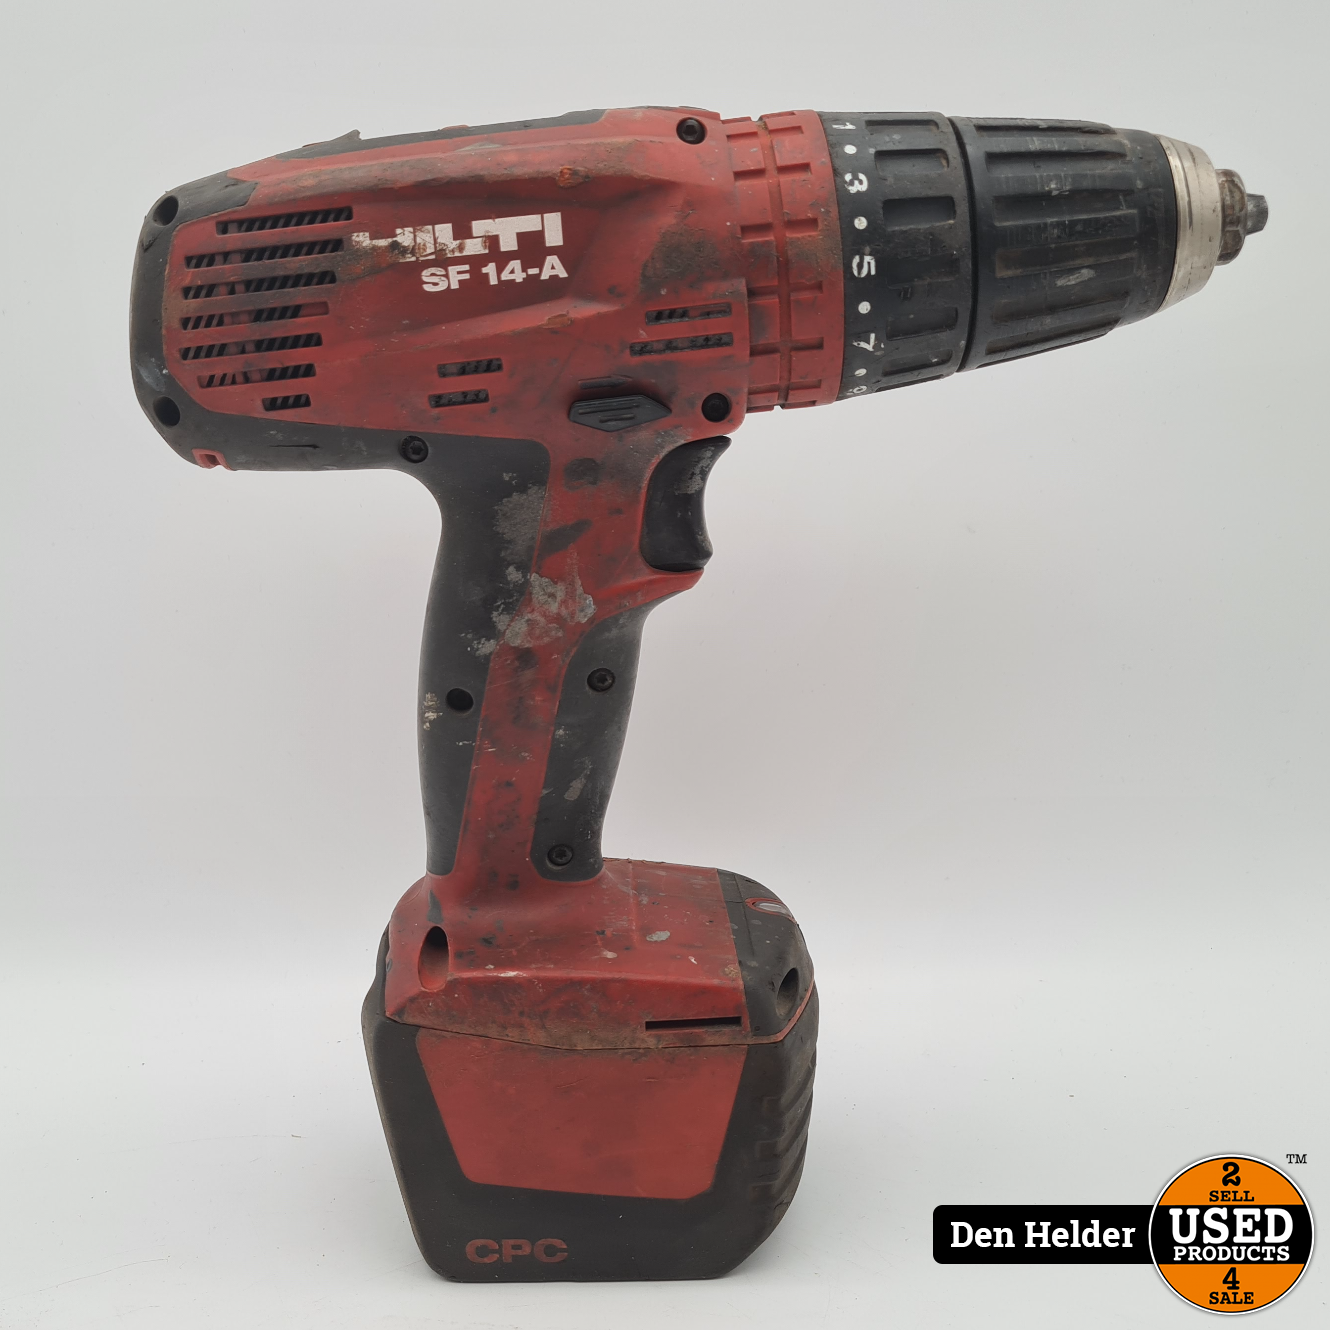 Geologie Gepland retort Hilti SF 14-A 14.4V Boormachine - In Goede Staat - Used Products Den Helder